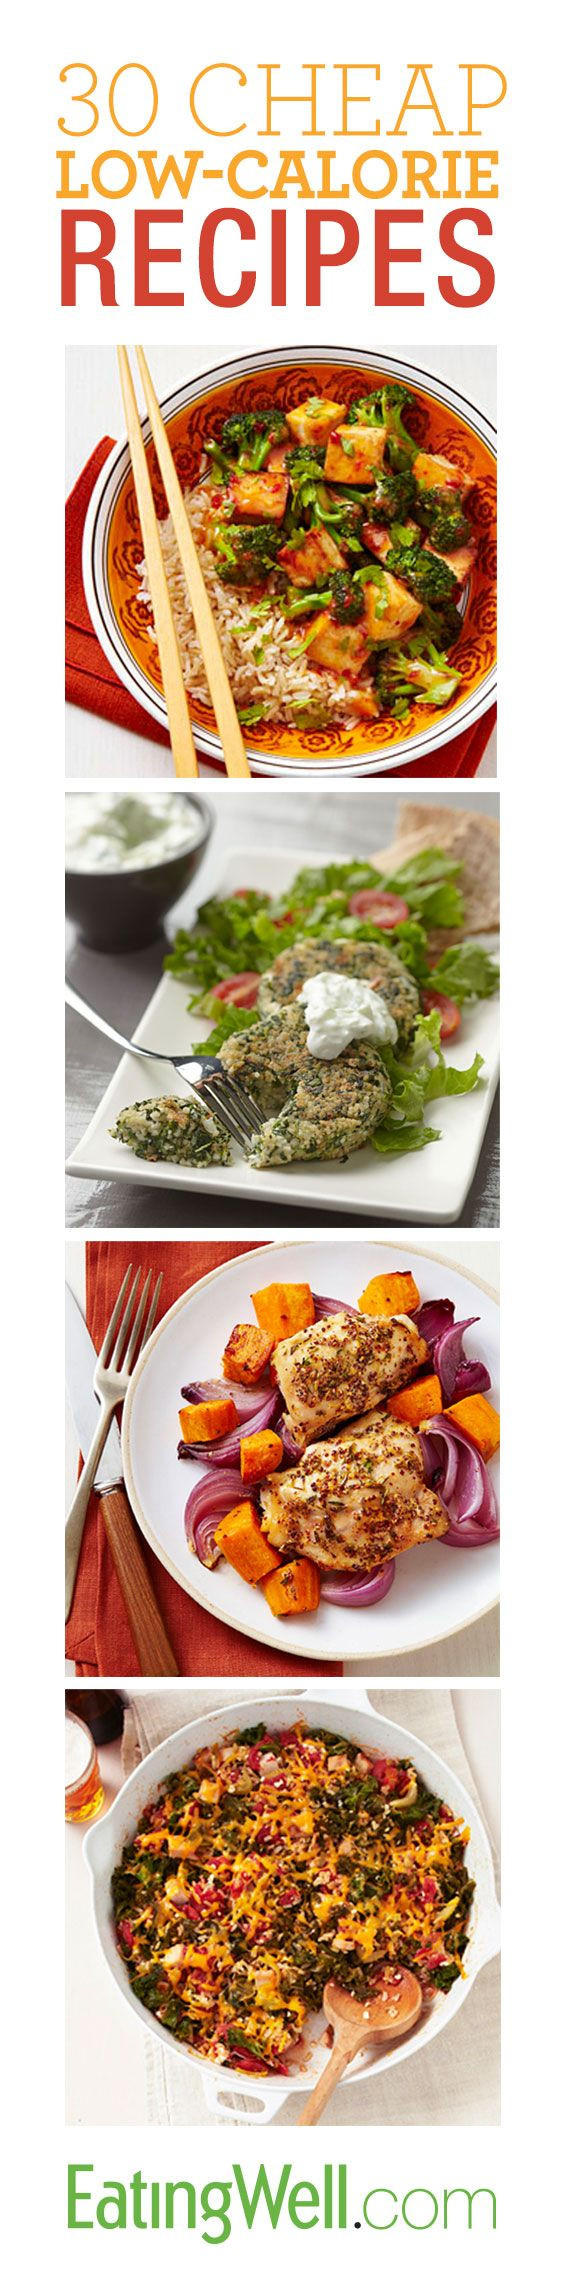 Cheap Low Calorie Dinners
 Get the recipes on EatingWell